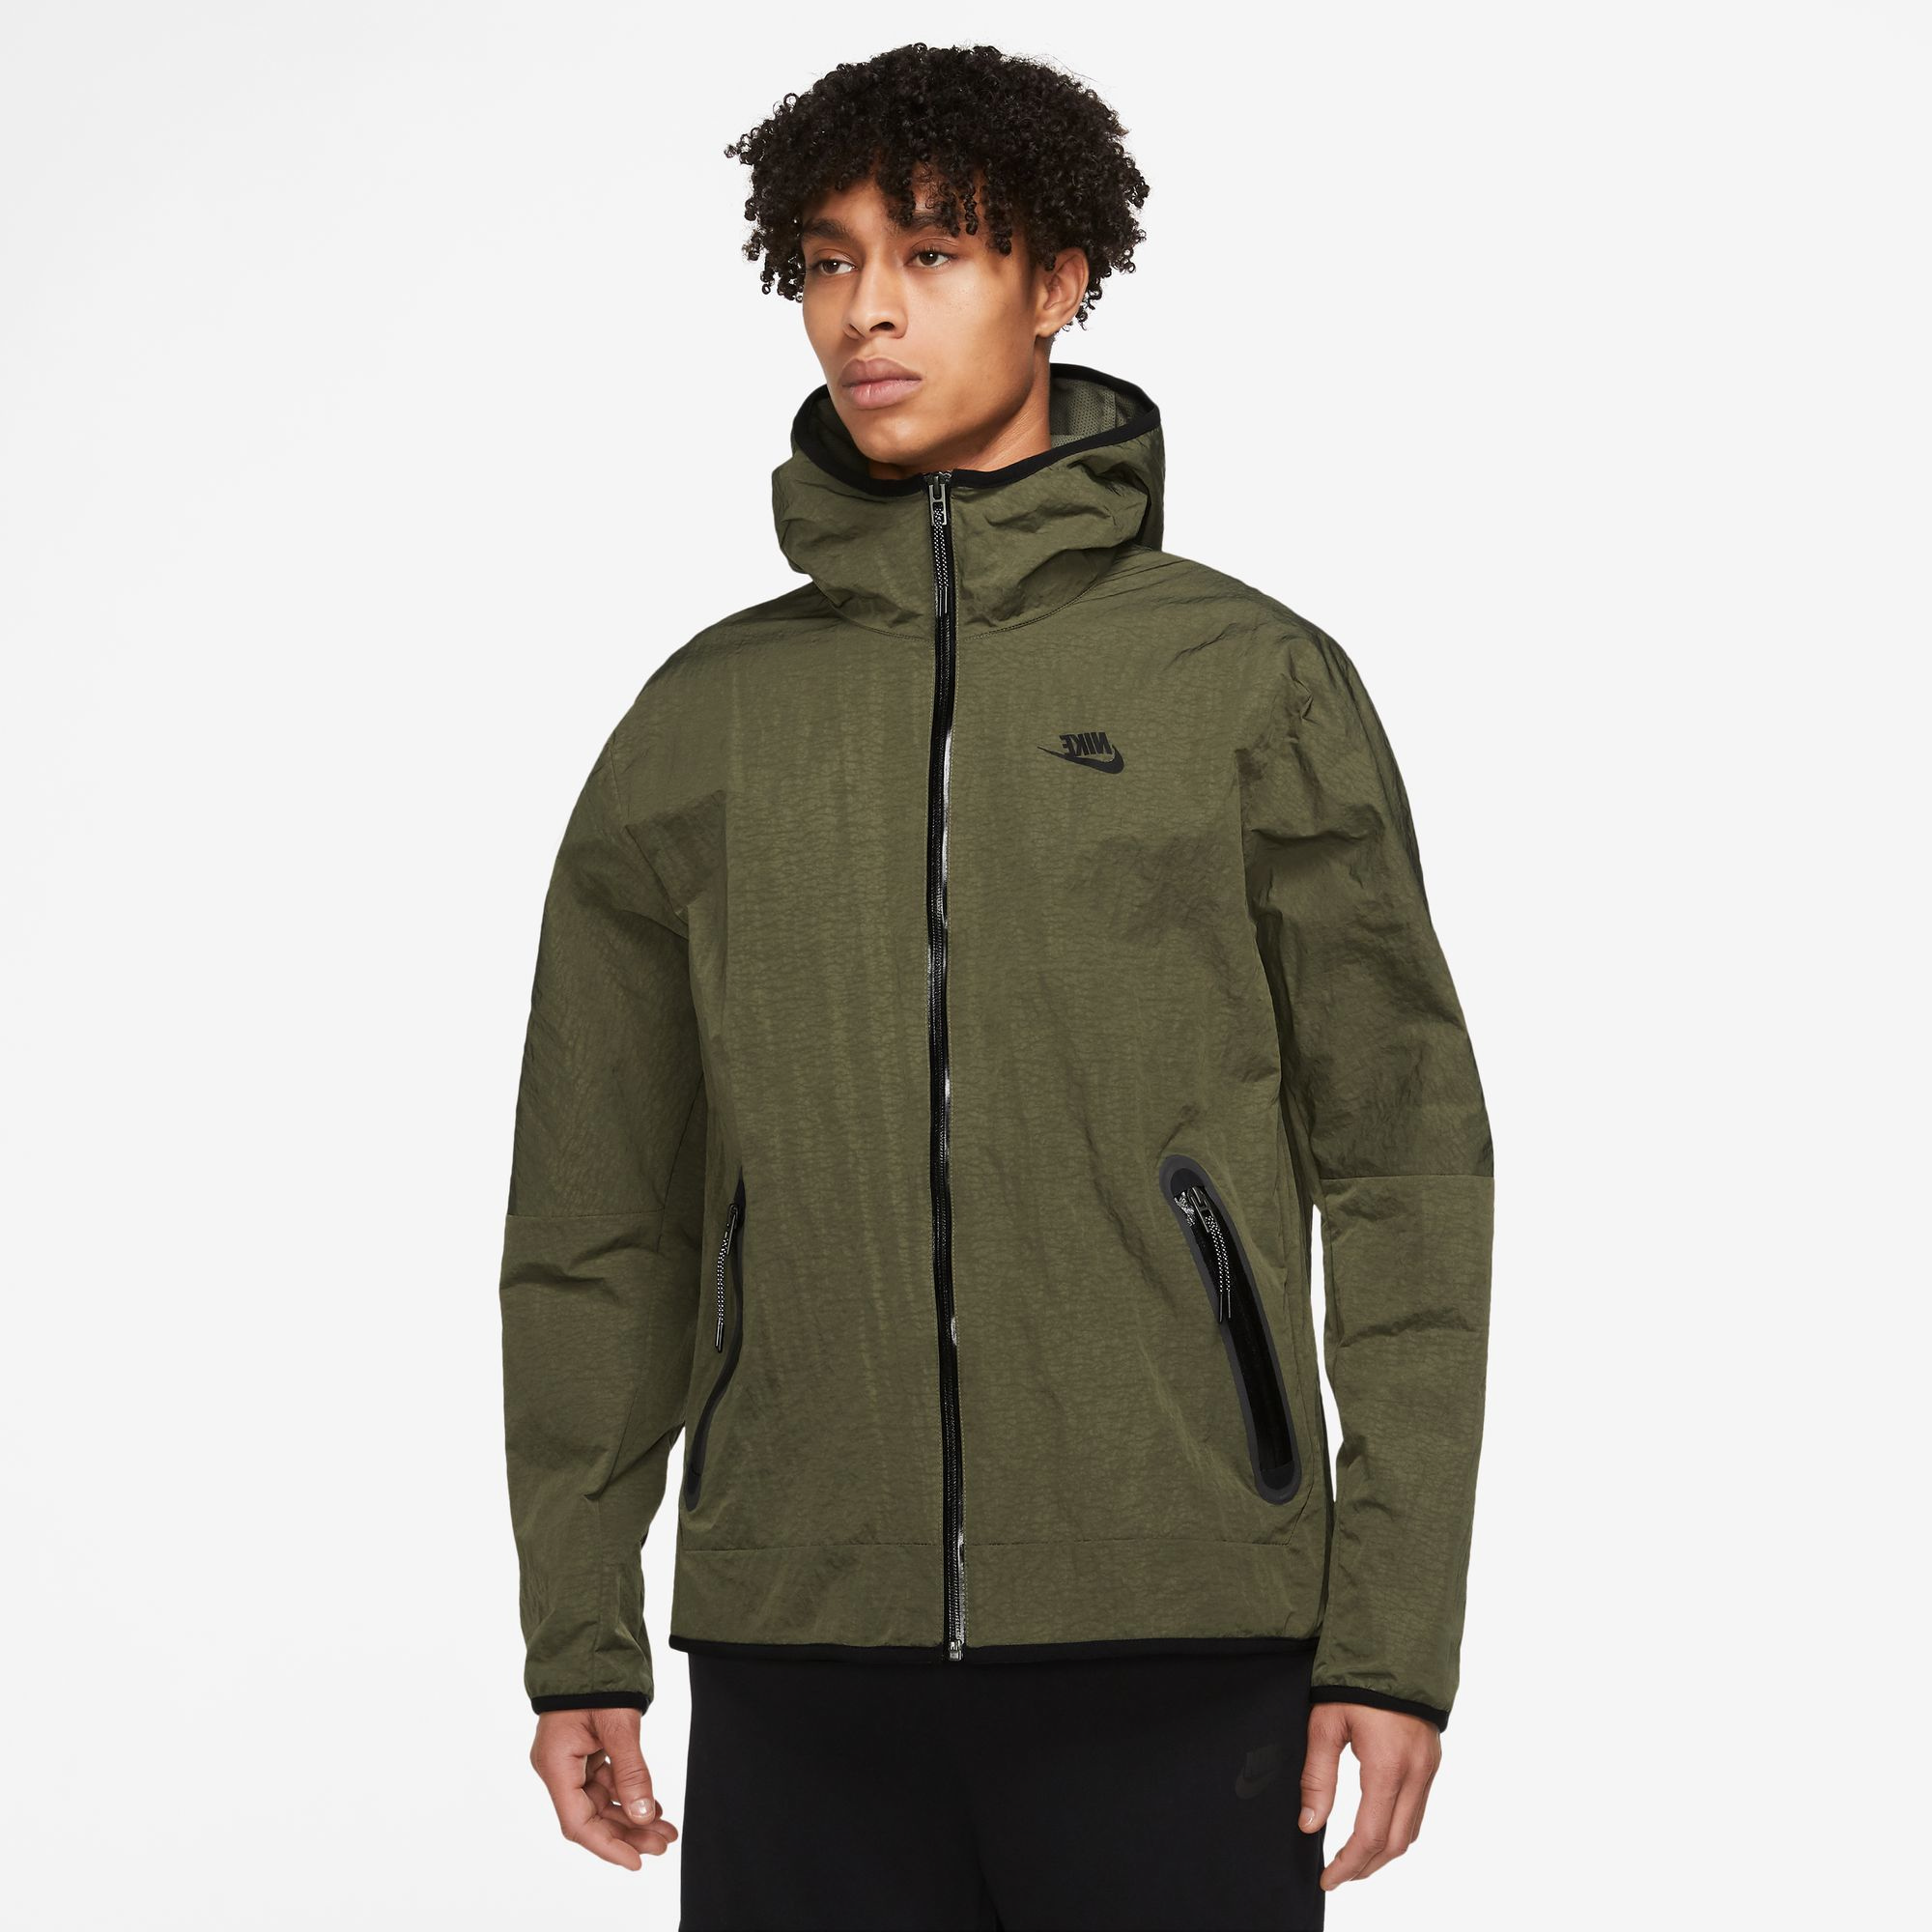 puede Tareas del hogar col china Nike Tech Woven Jacket | Champs Sports